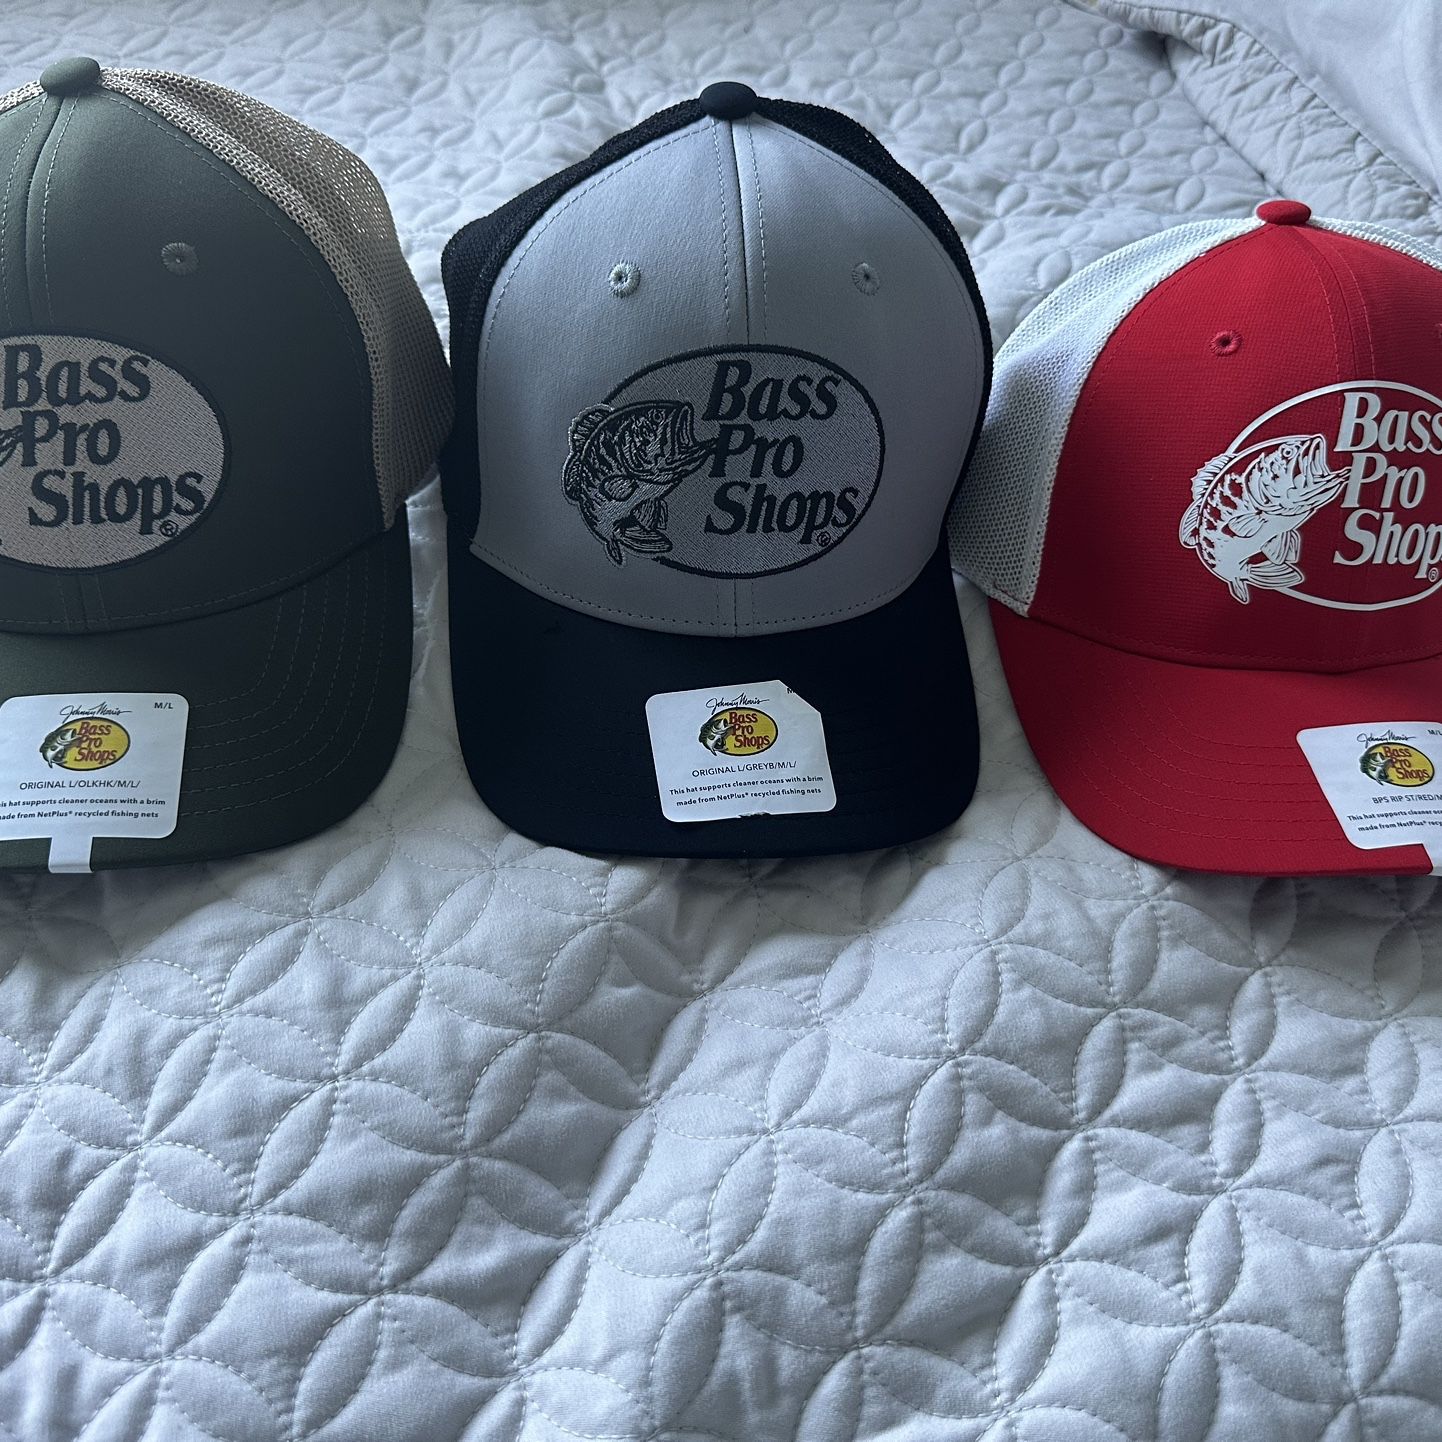 Bass Pro Shop Hats for Sale in Huntington Park, CA - OfferUp